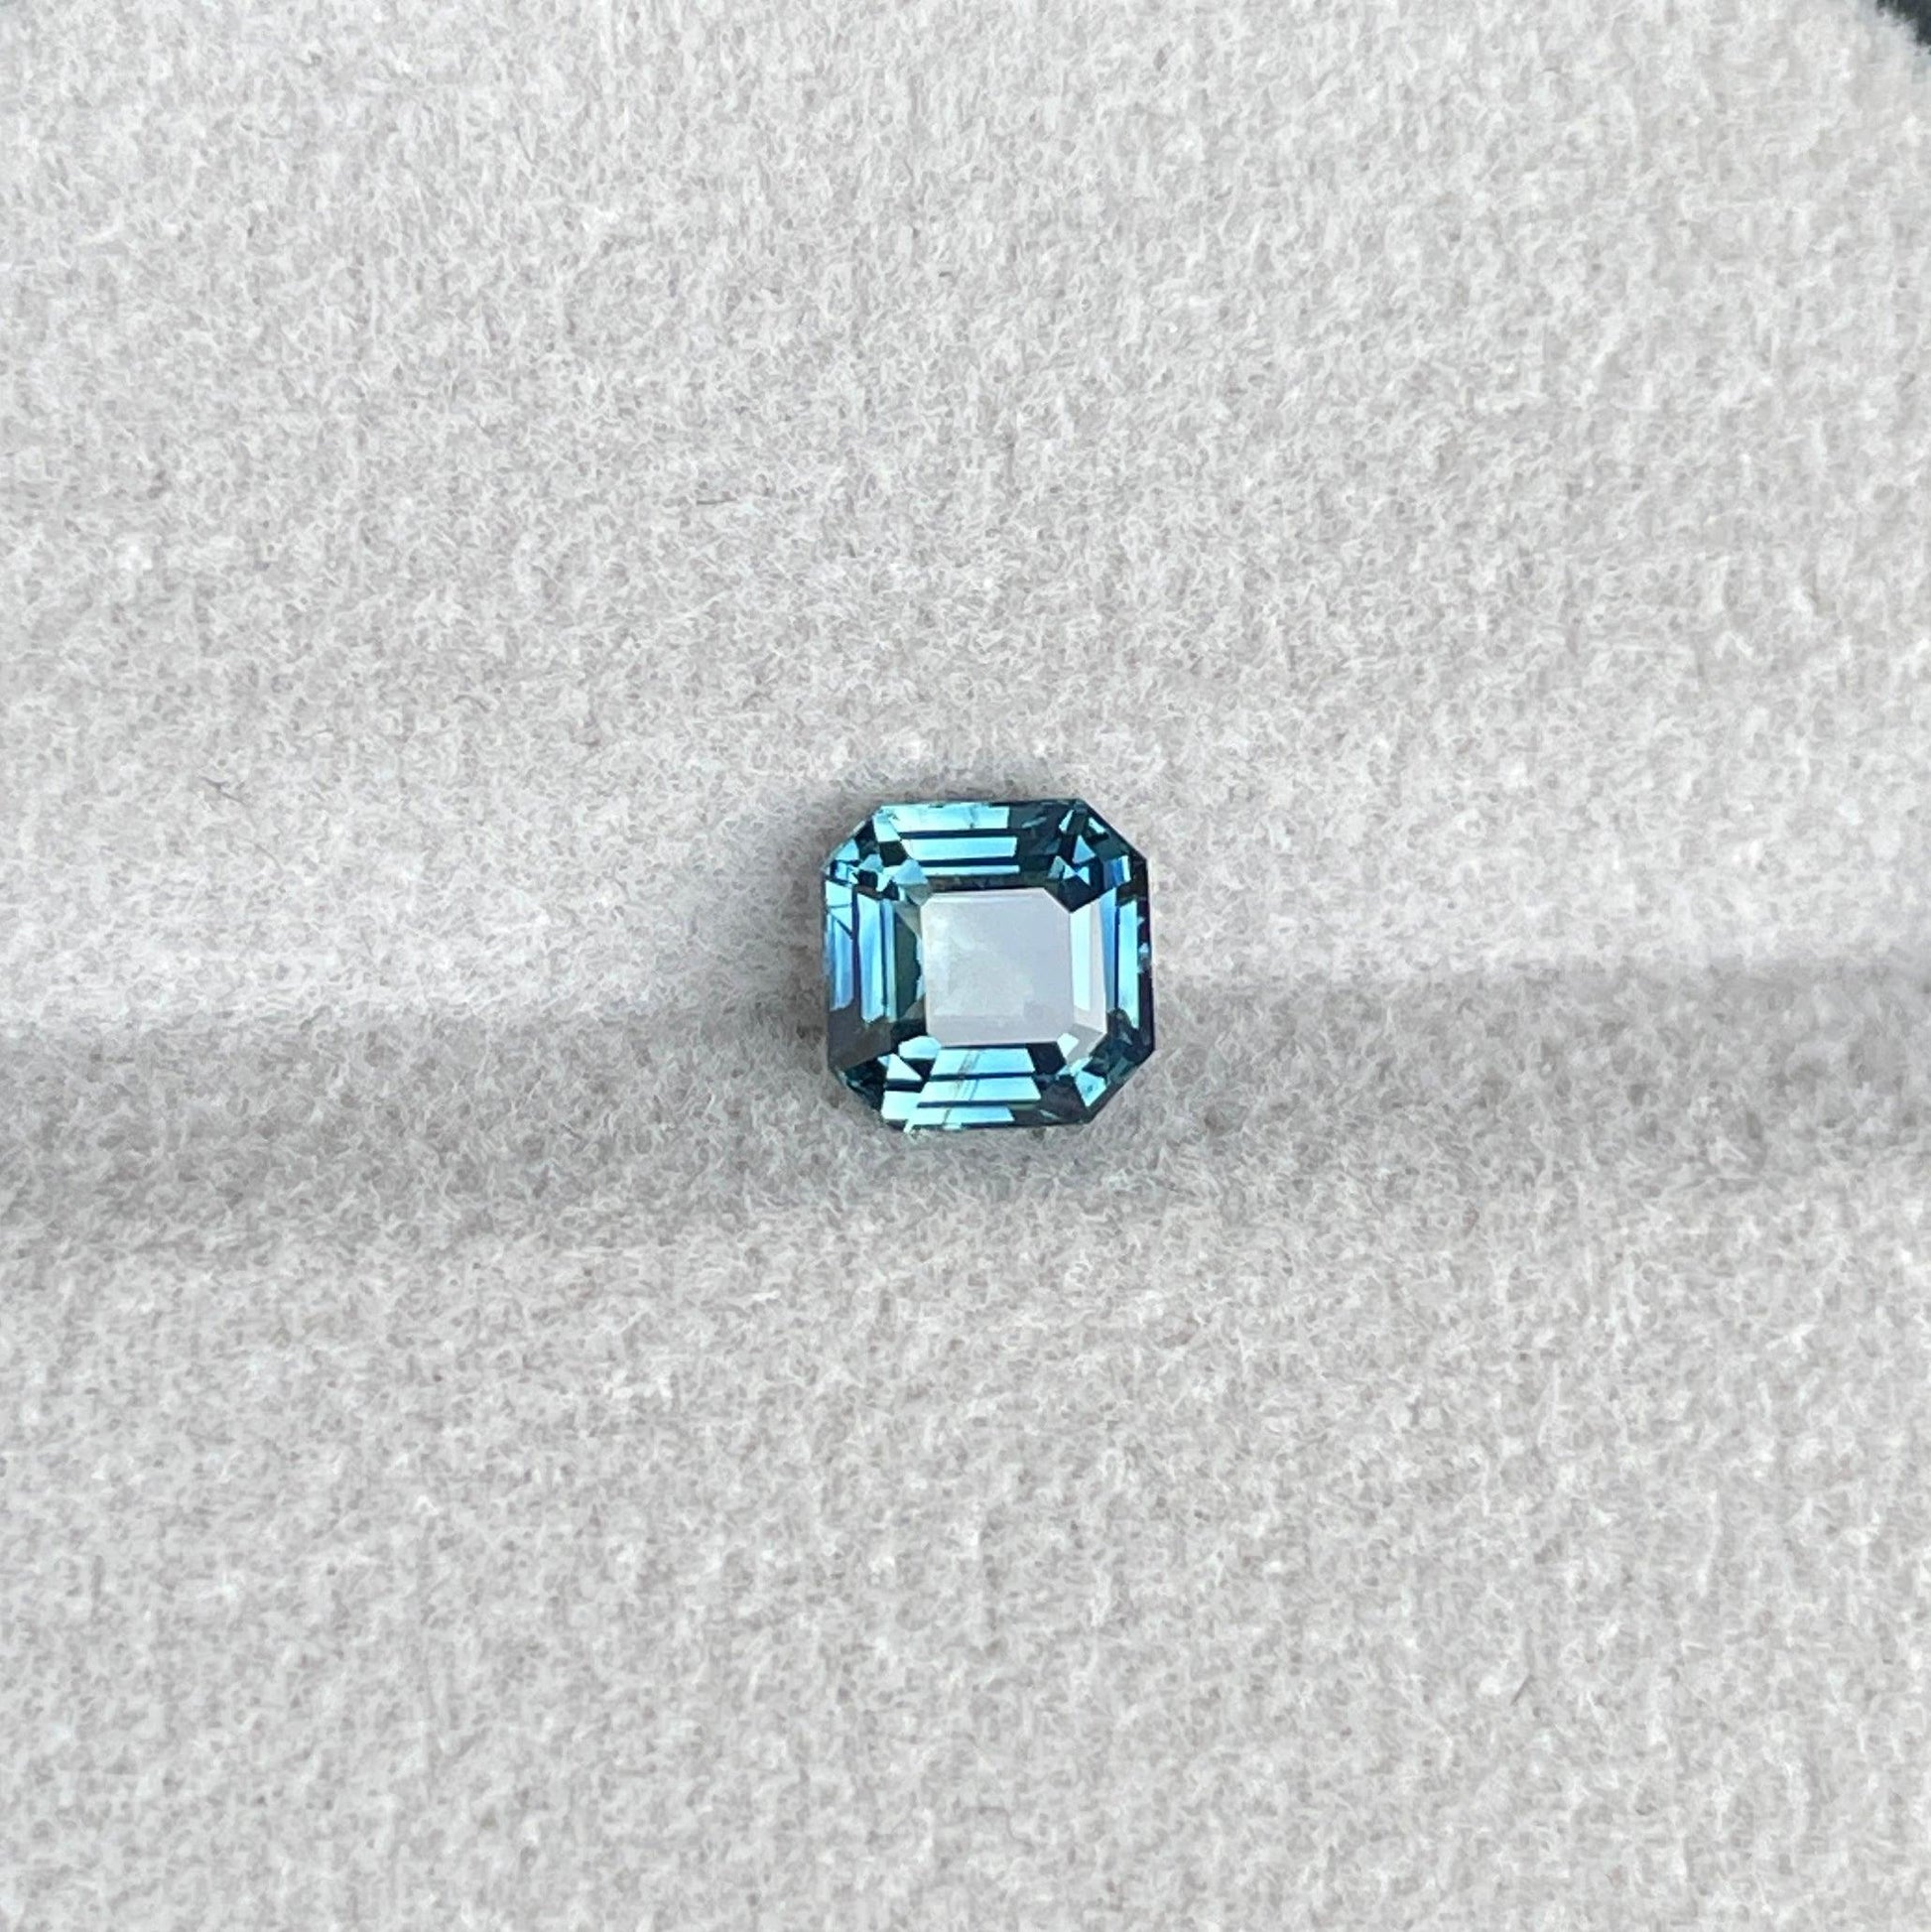 1.08 carat Teal Sapphire is well cut to bring out the best colour and luster, - NASHGEMS